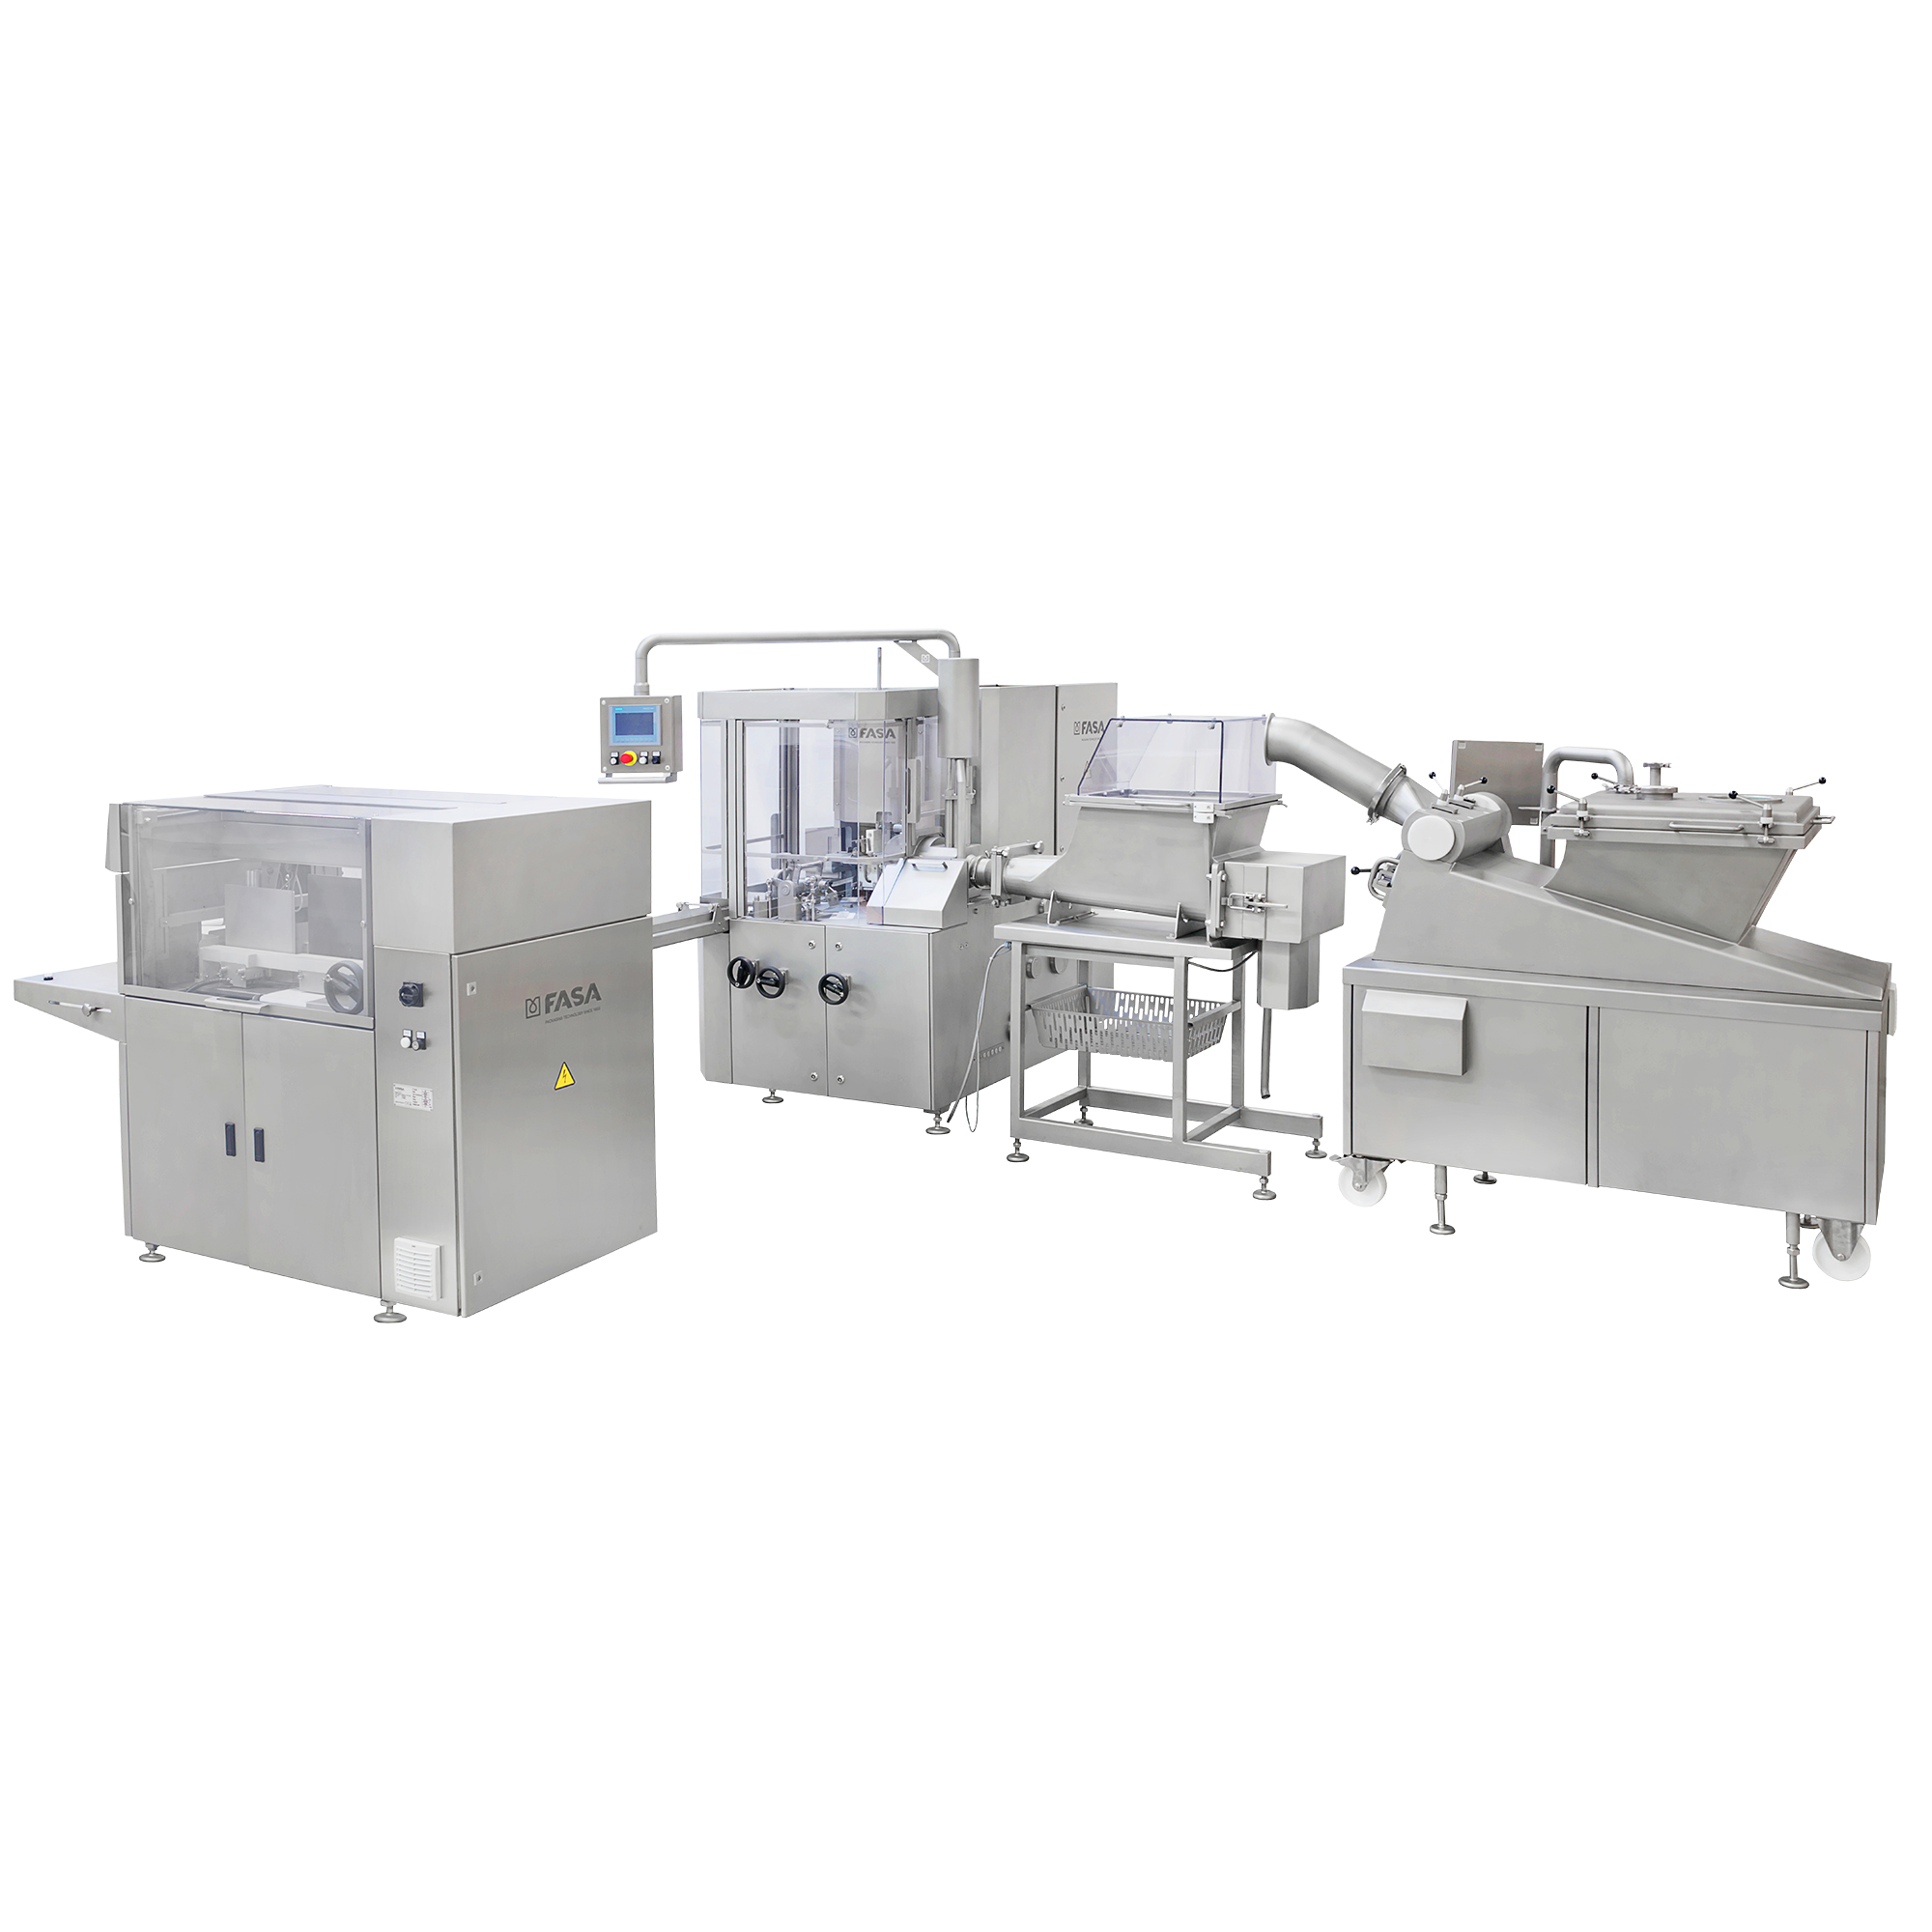 Butter re-packing line